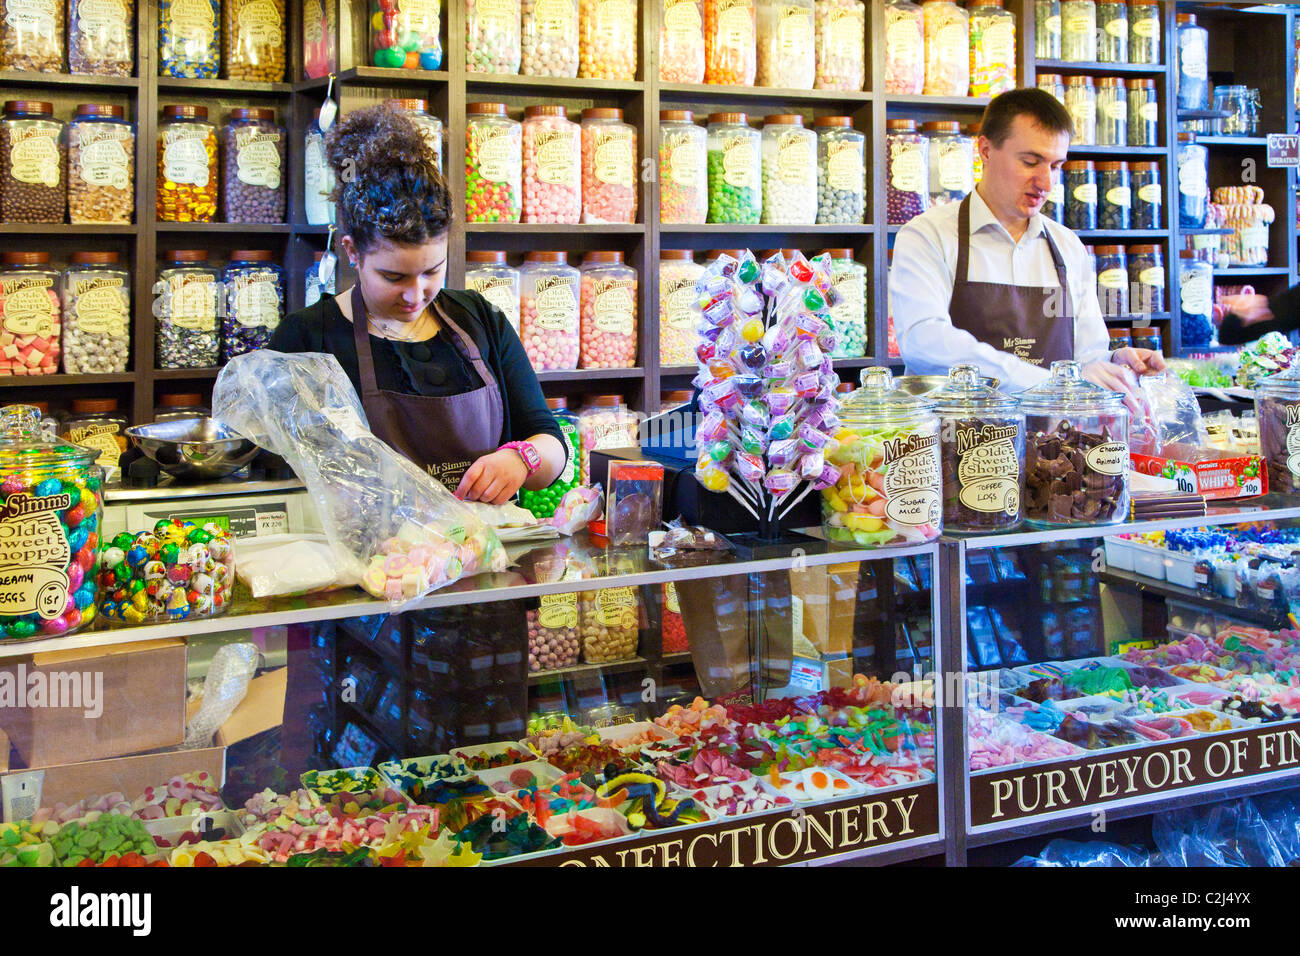 Traditional candy store or sweet shop with display shelving of sweet jars. Two assistants wrapping confectionery at the counter. Stock Photo